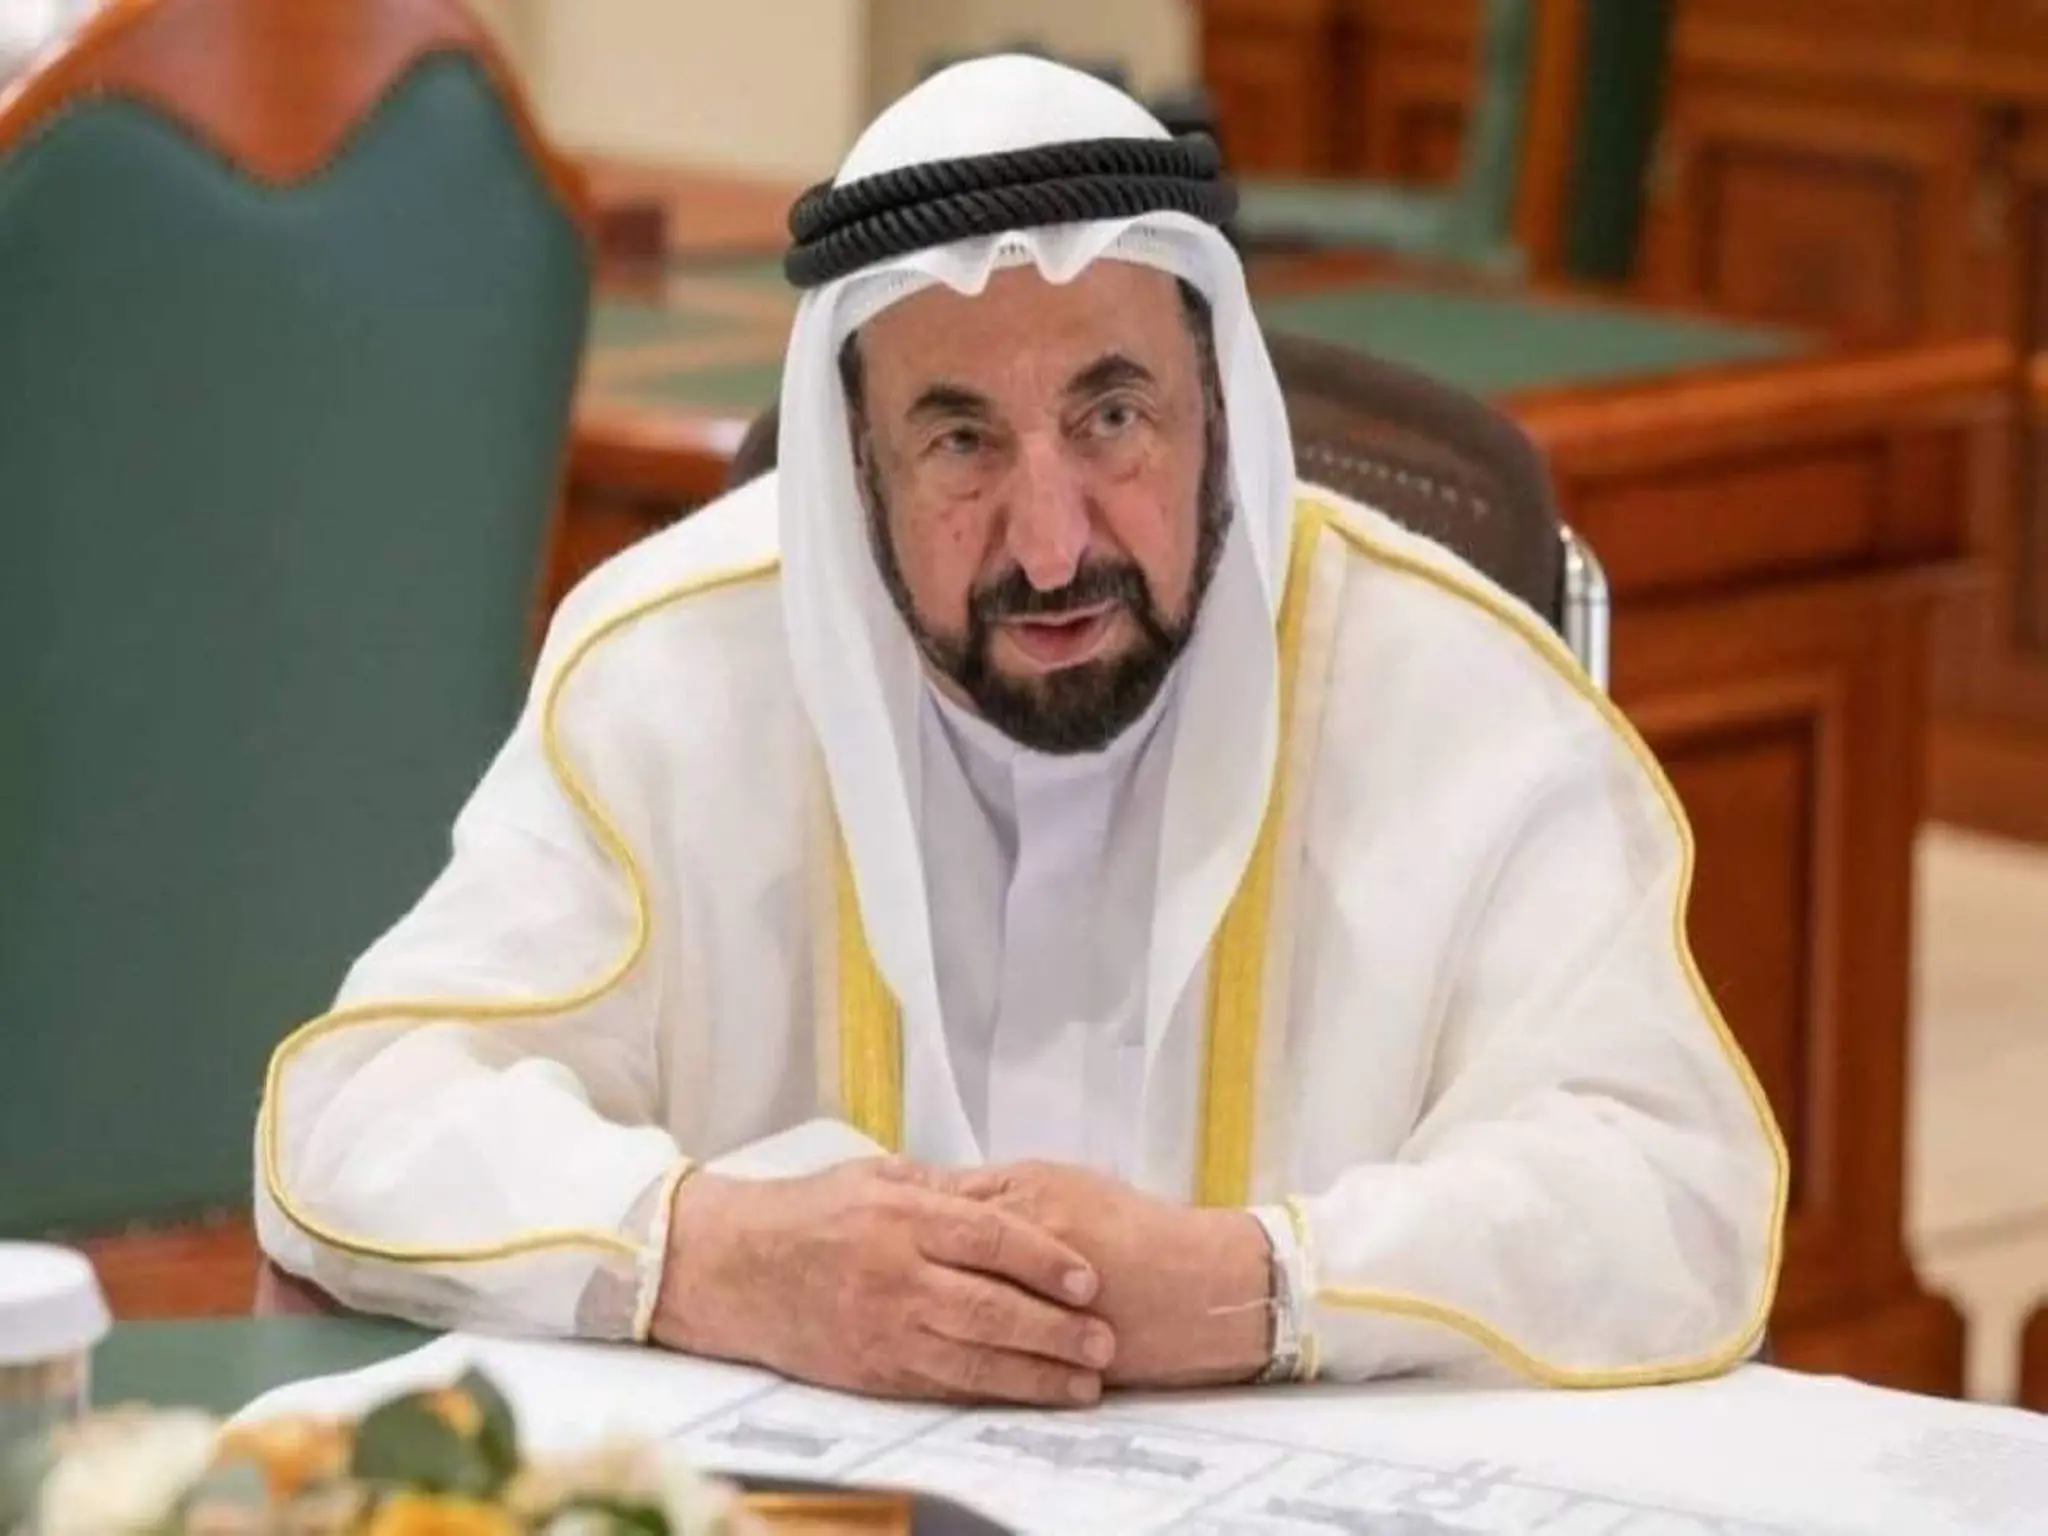 The Ruler of Sharjah issues a new law regarding employment and Human Resources